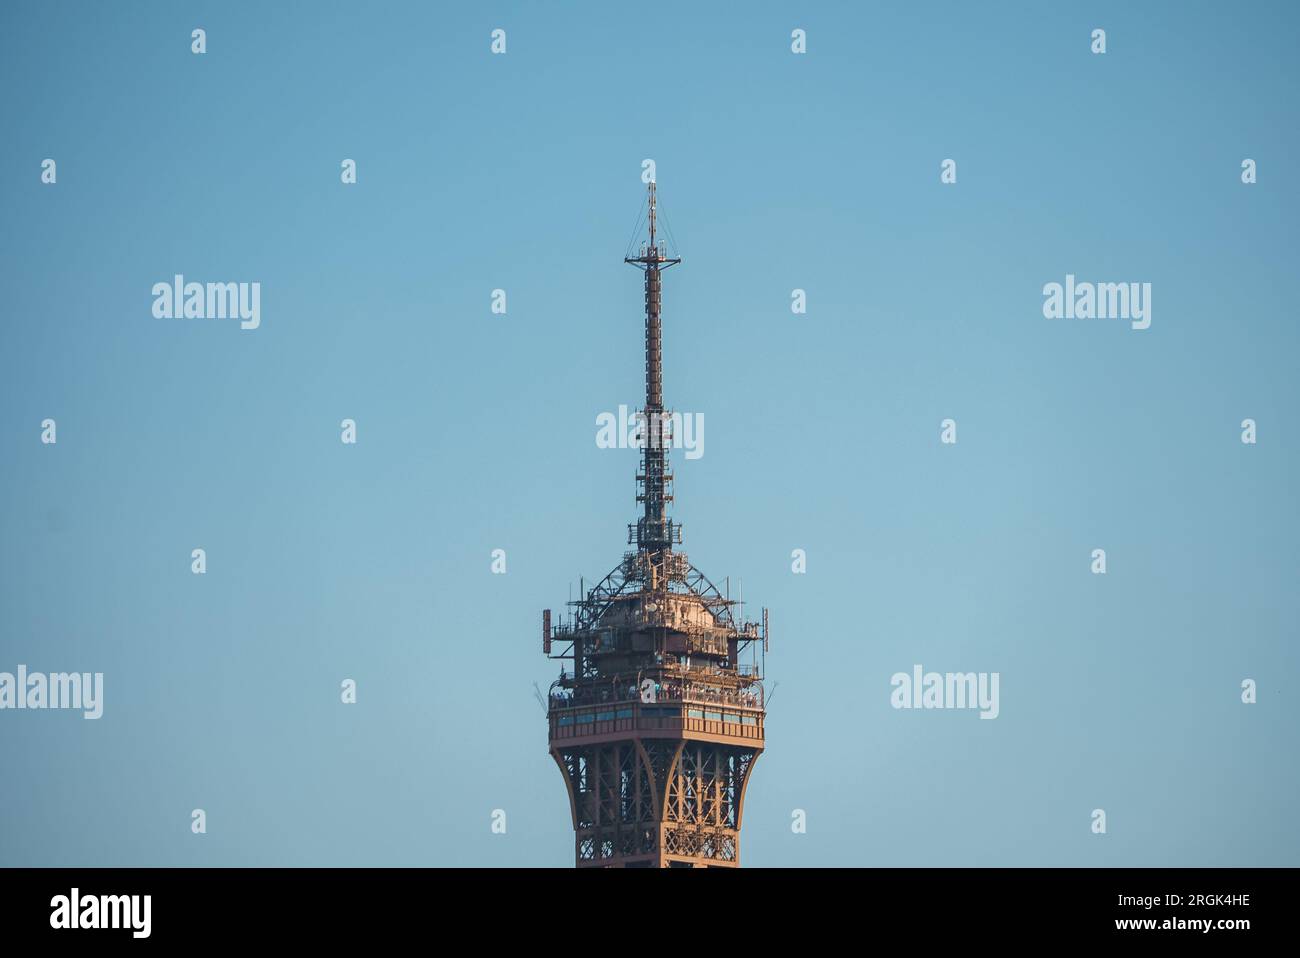 Eiffel Tower Top Close-Up Against Blue Sky Stock Photo